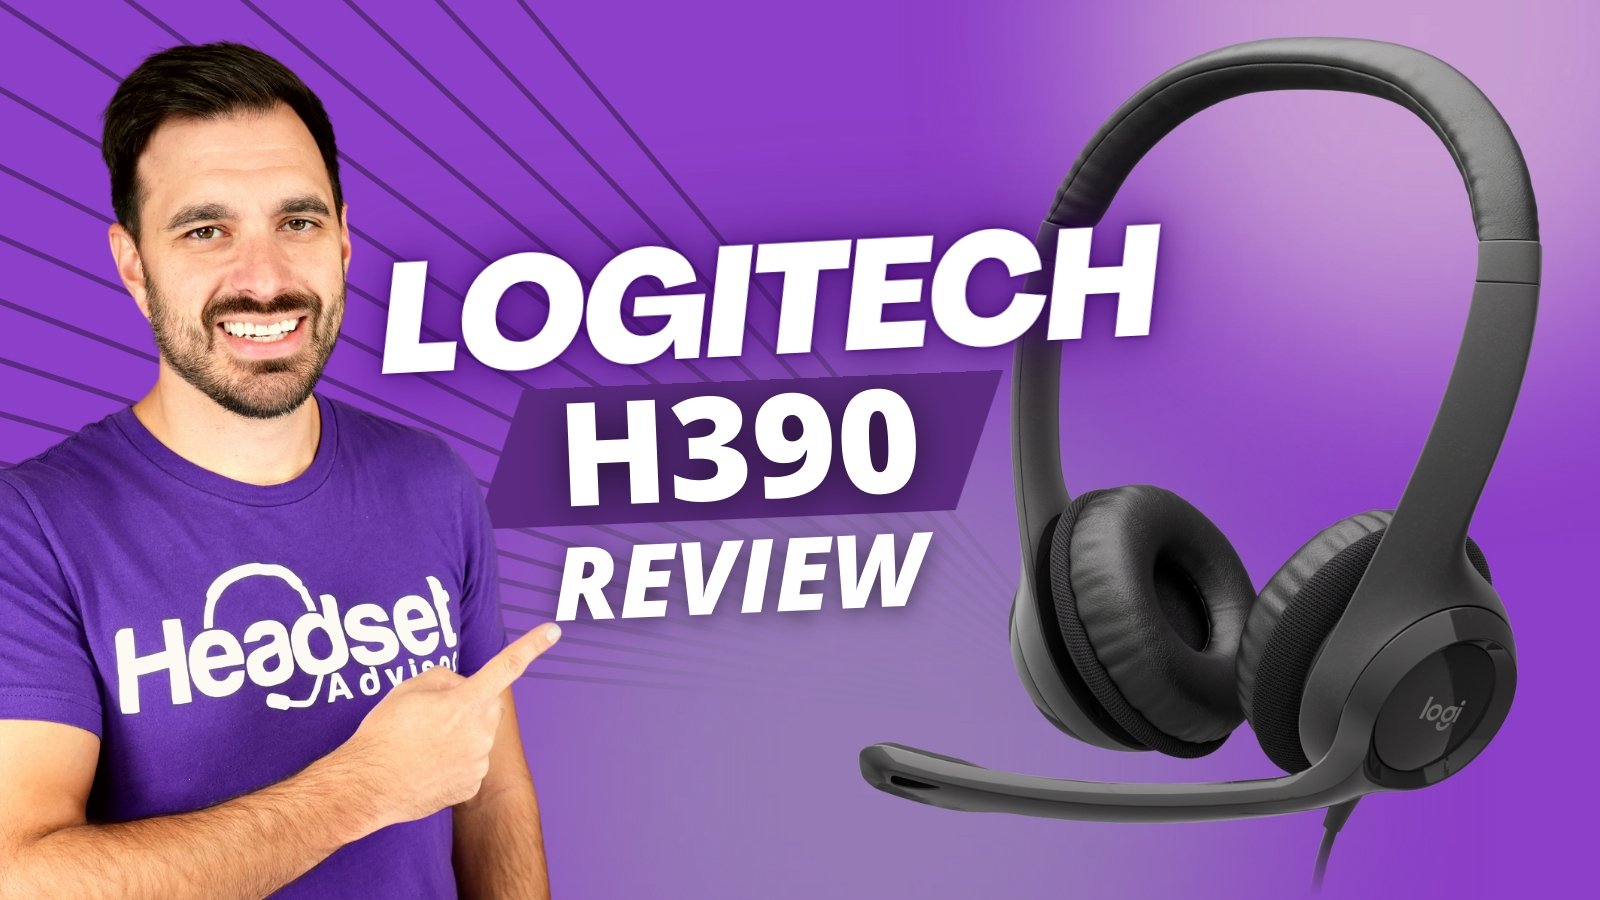 Logitech Computer Headsets for sale